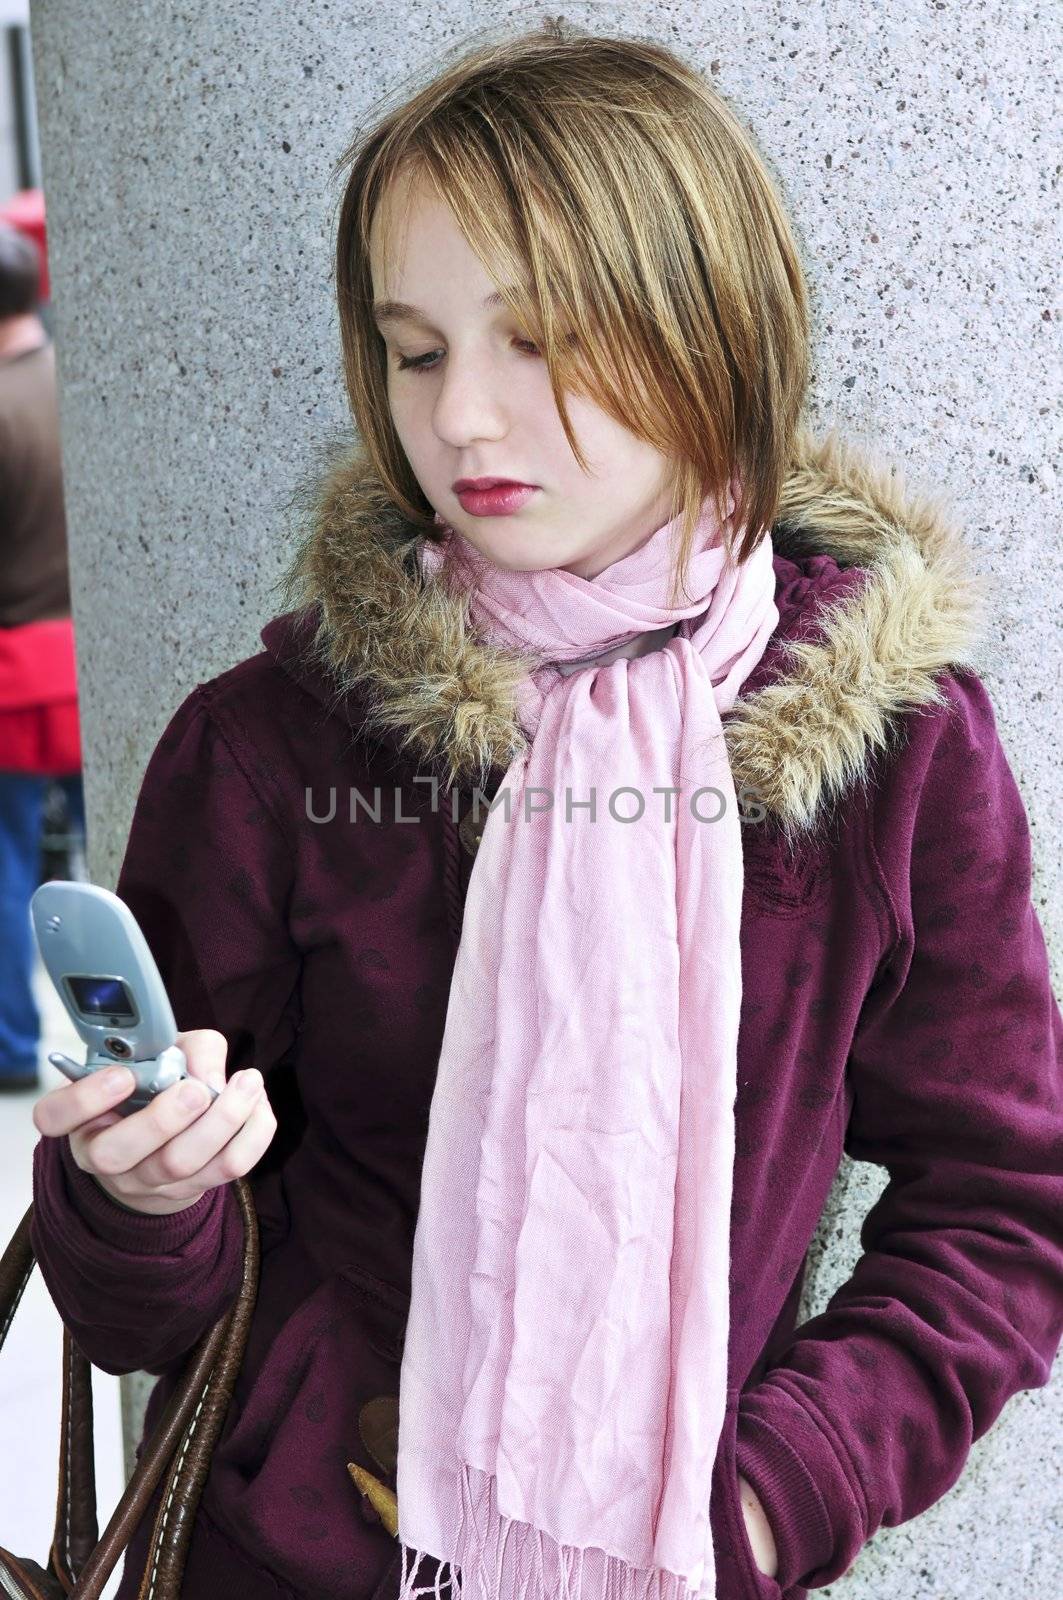 Teenage girl text messaging on cell phone by elenathewise